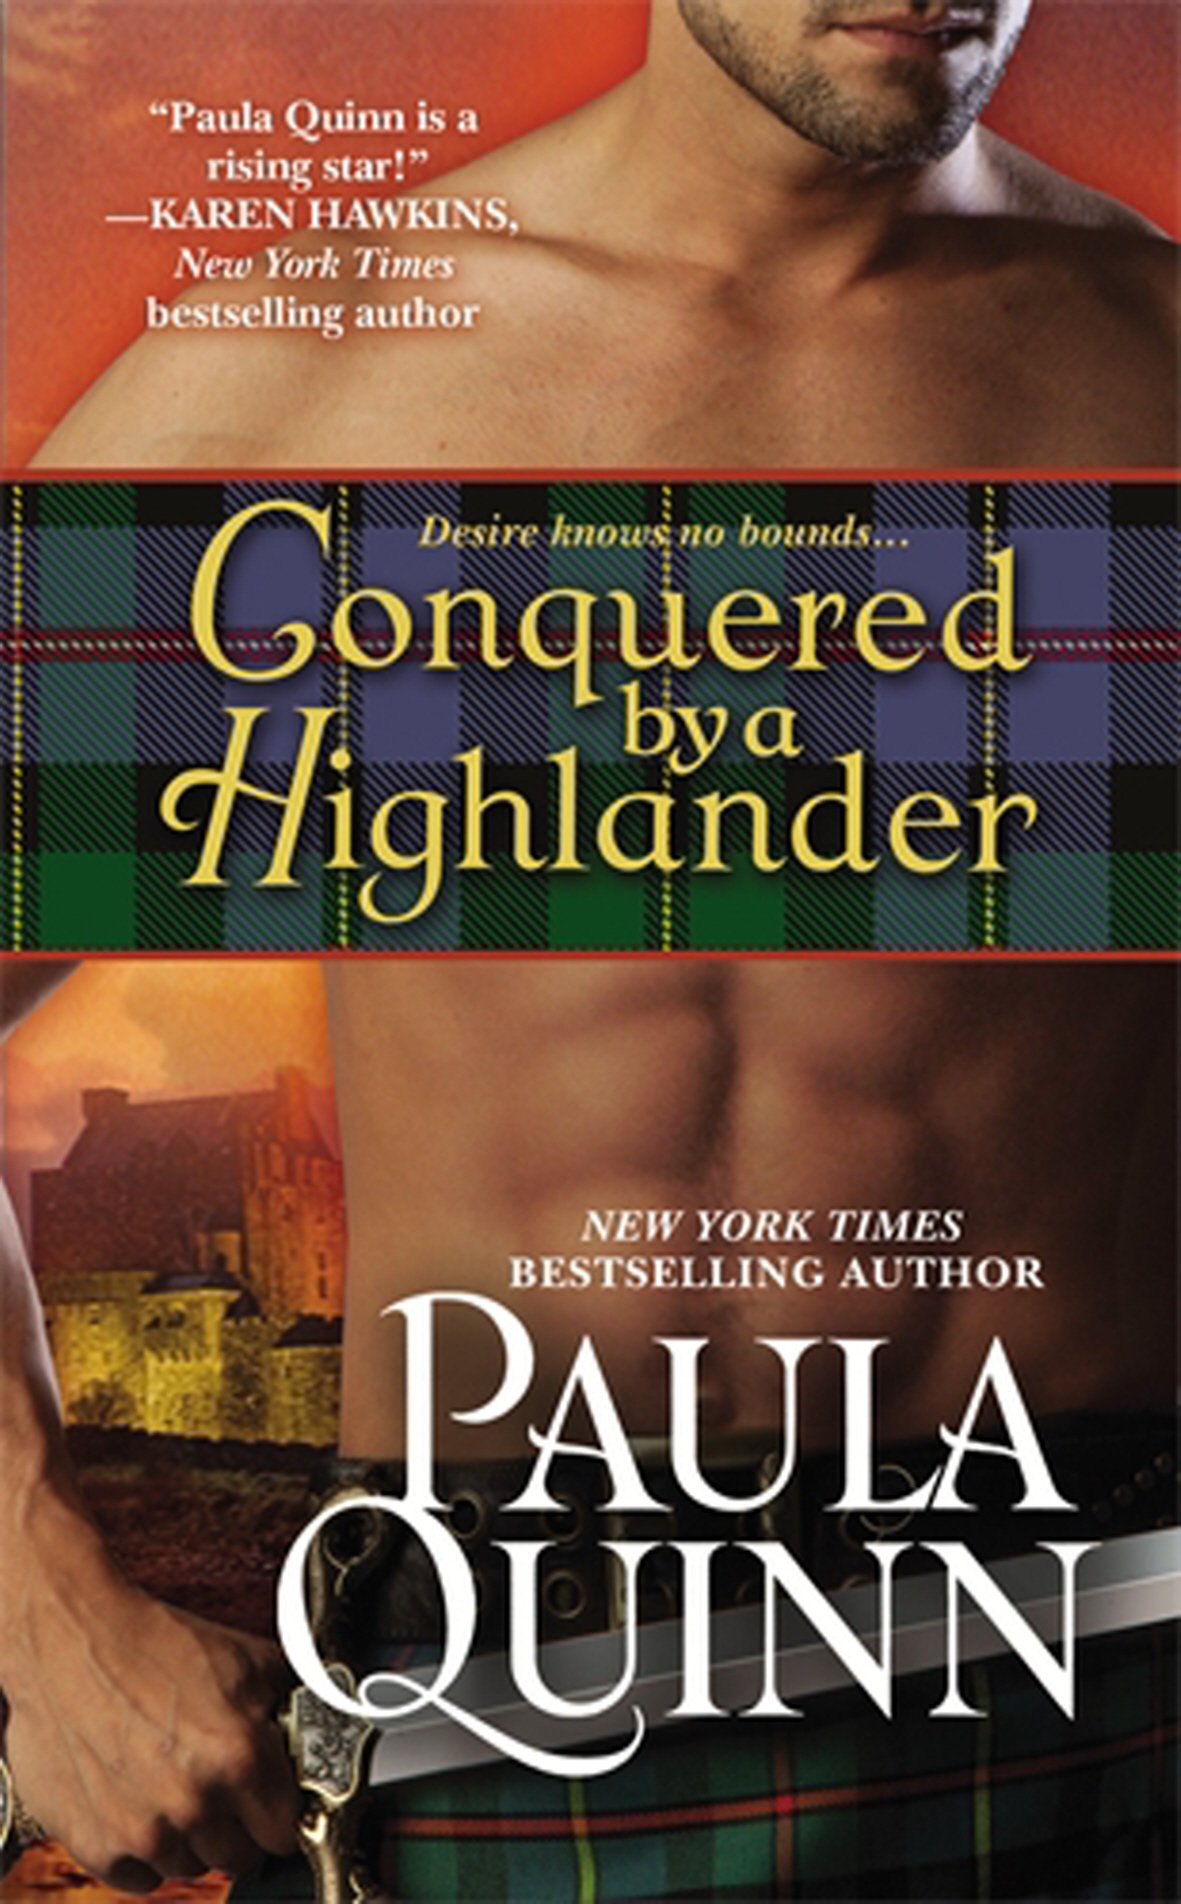 ARC Review: Conquered by a Highlander by Paula Quinn